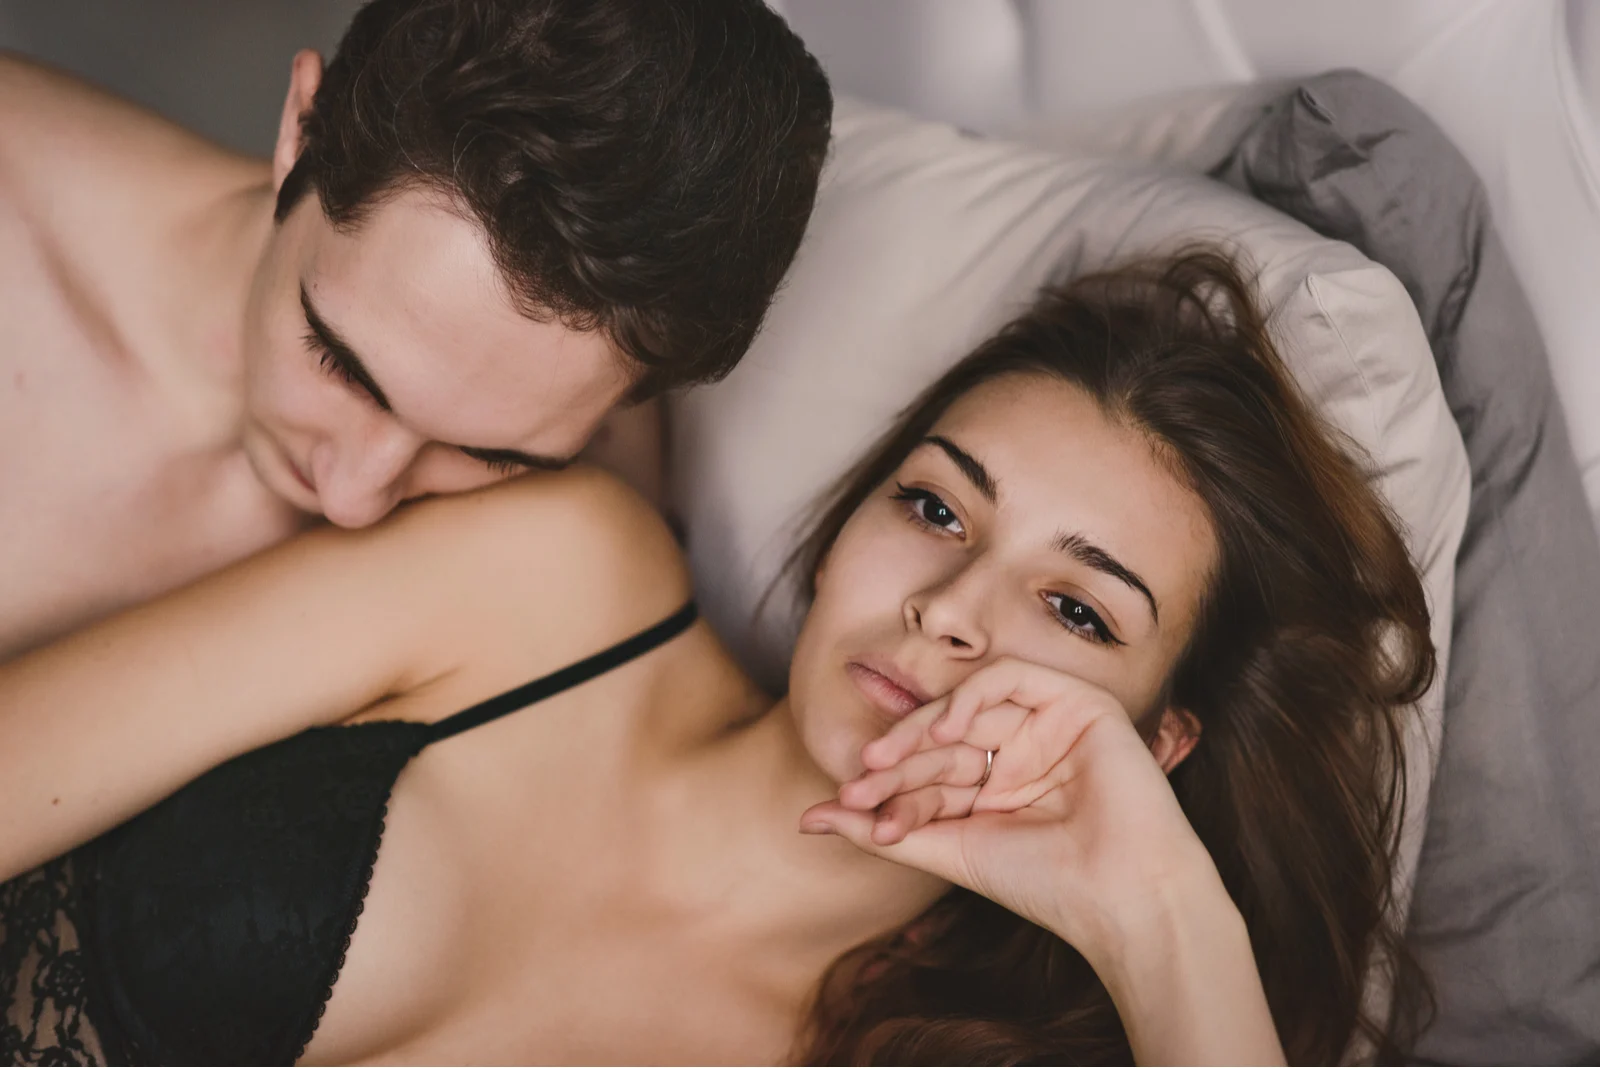 disinterested woman lying in bed with man